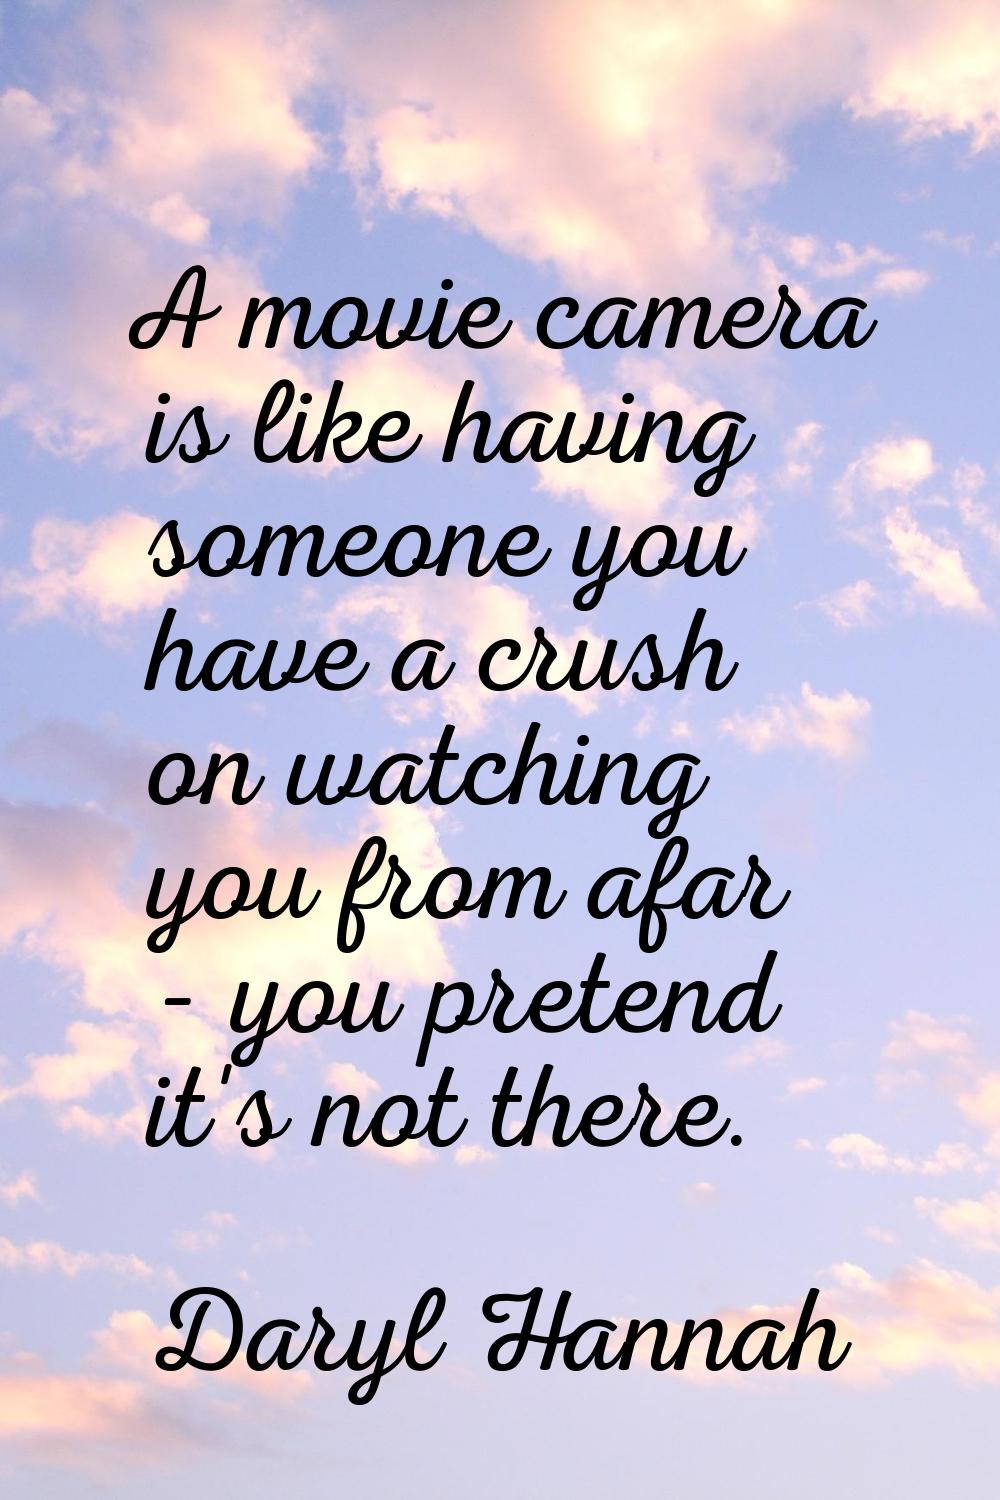 A movie camera is like having someone you have a crush on watching you from afar - you pretend it's